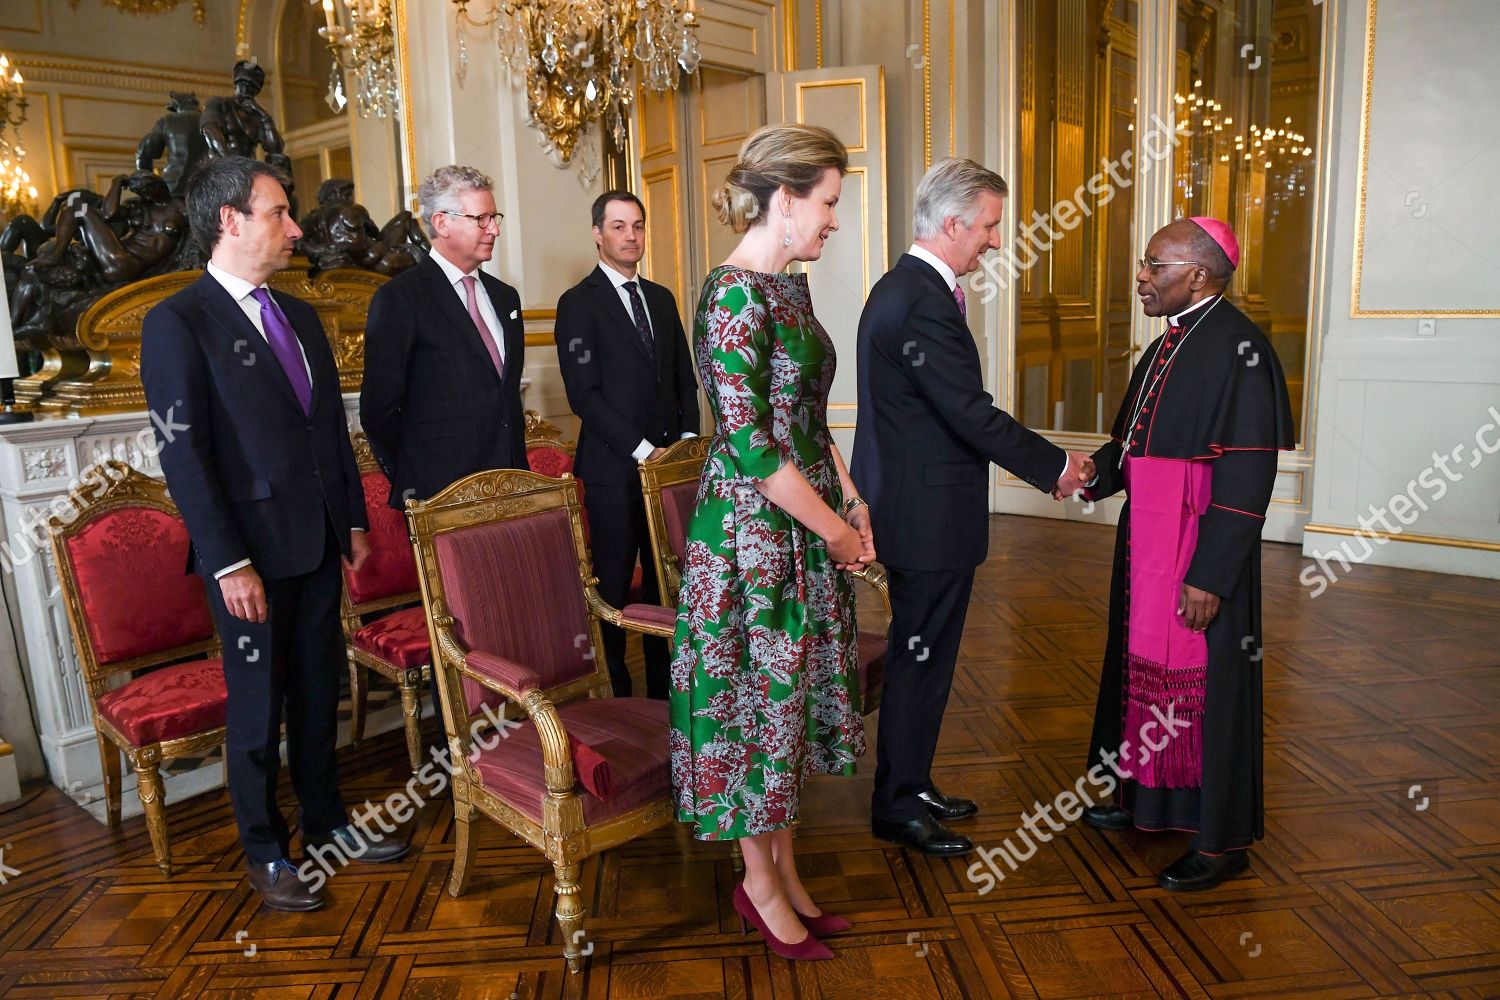 CASA REAL BELGA - Página 92 King-philippe-and-queen-mathilde-receive-the-heads-of-diplomatic-missions-brussels-belgium-shutterstock-editorial-10525487a